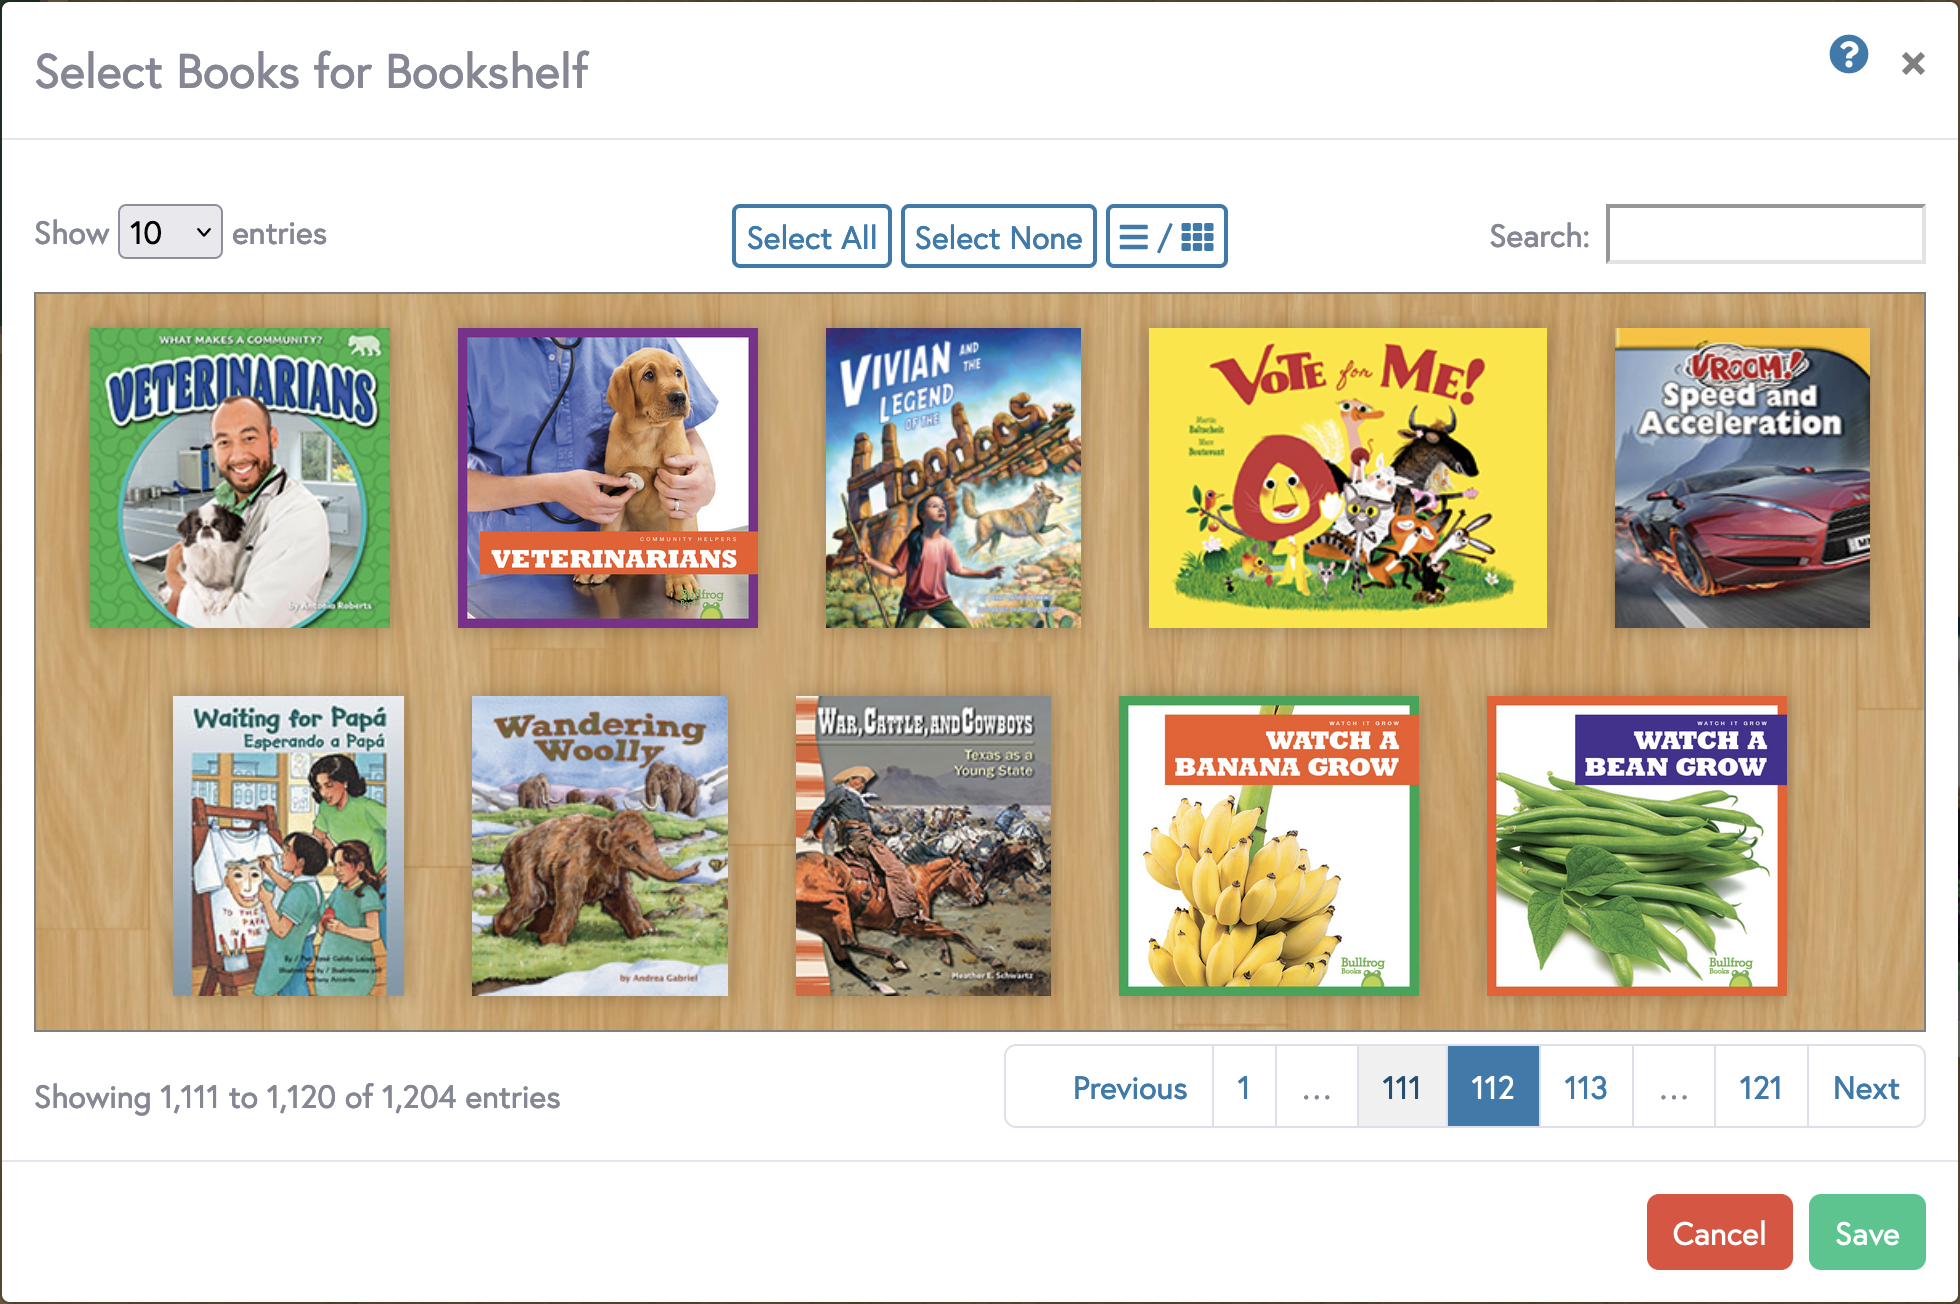 Sceenshot of the select books modal